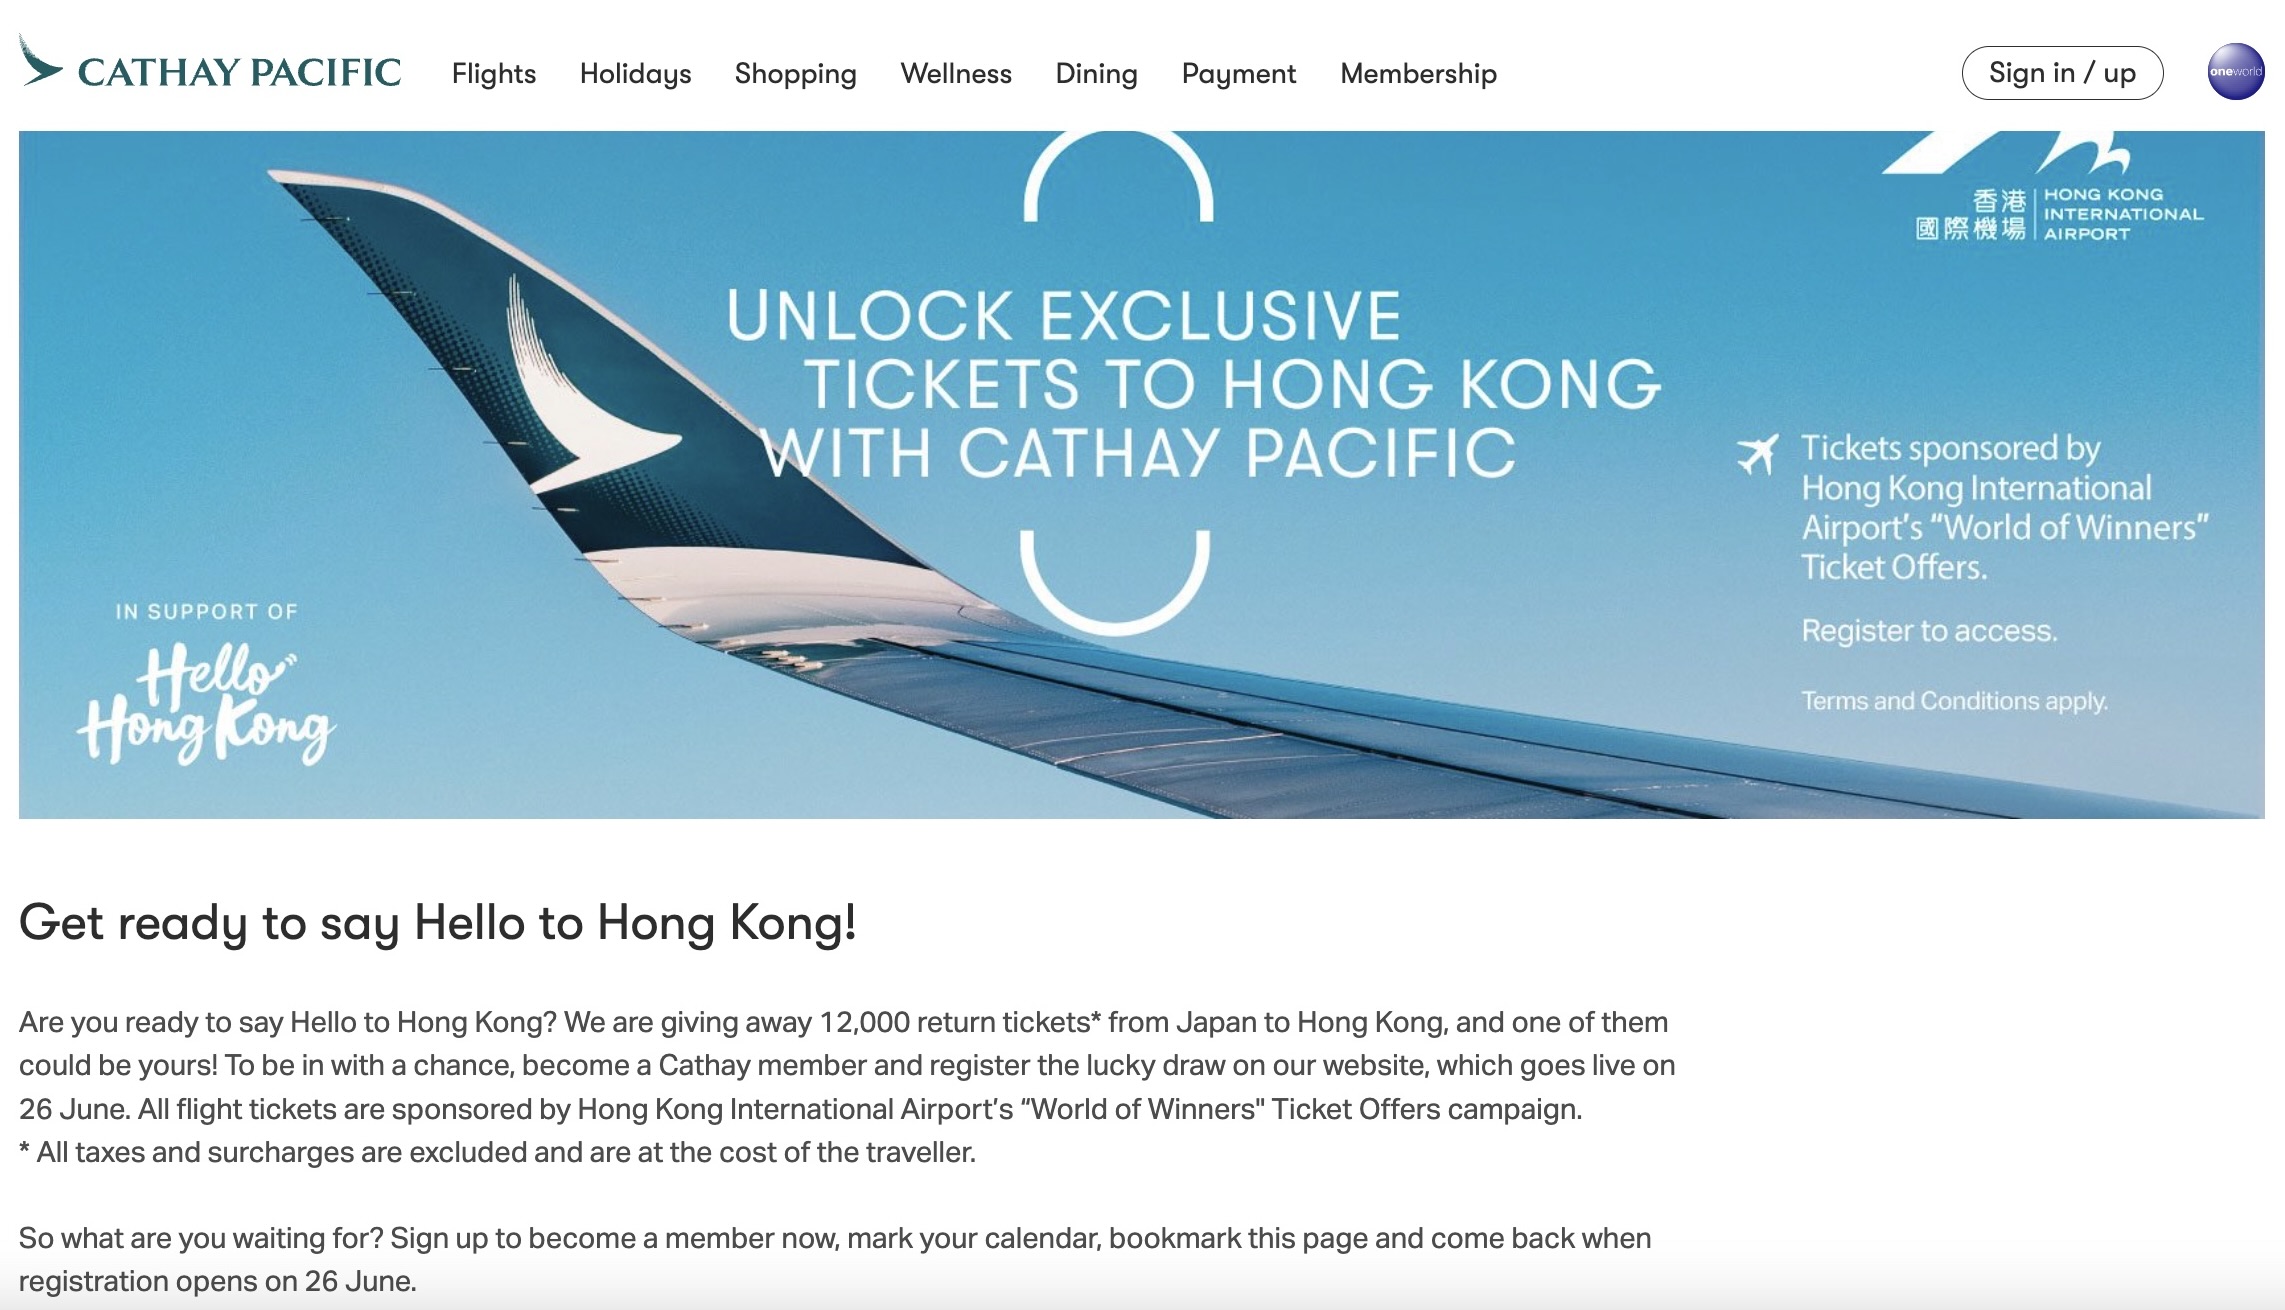 Registrations for the Cathay Pacific lucky draw for tickets from Japan to Hong Kong will open on June 26, 2023.